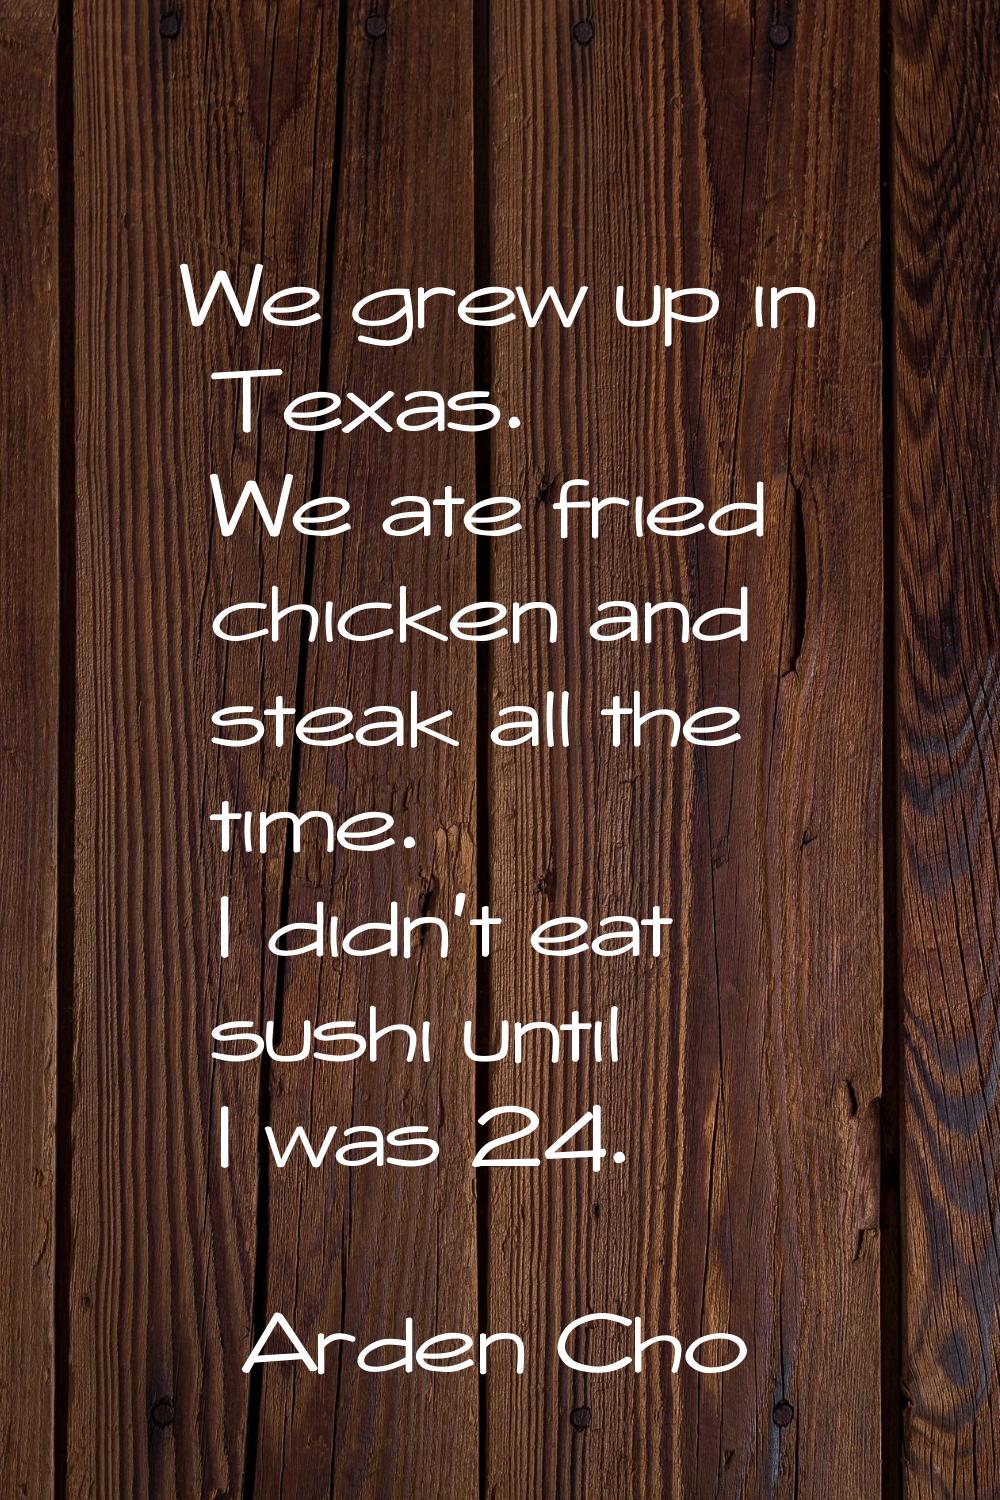 We grew up in Texas. We ate fried chicken and steak all the time. I didn't eat sushi until I was 24